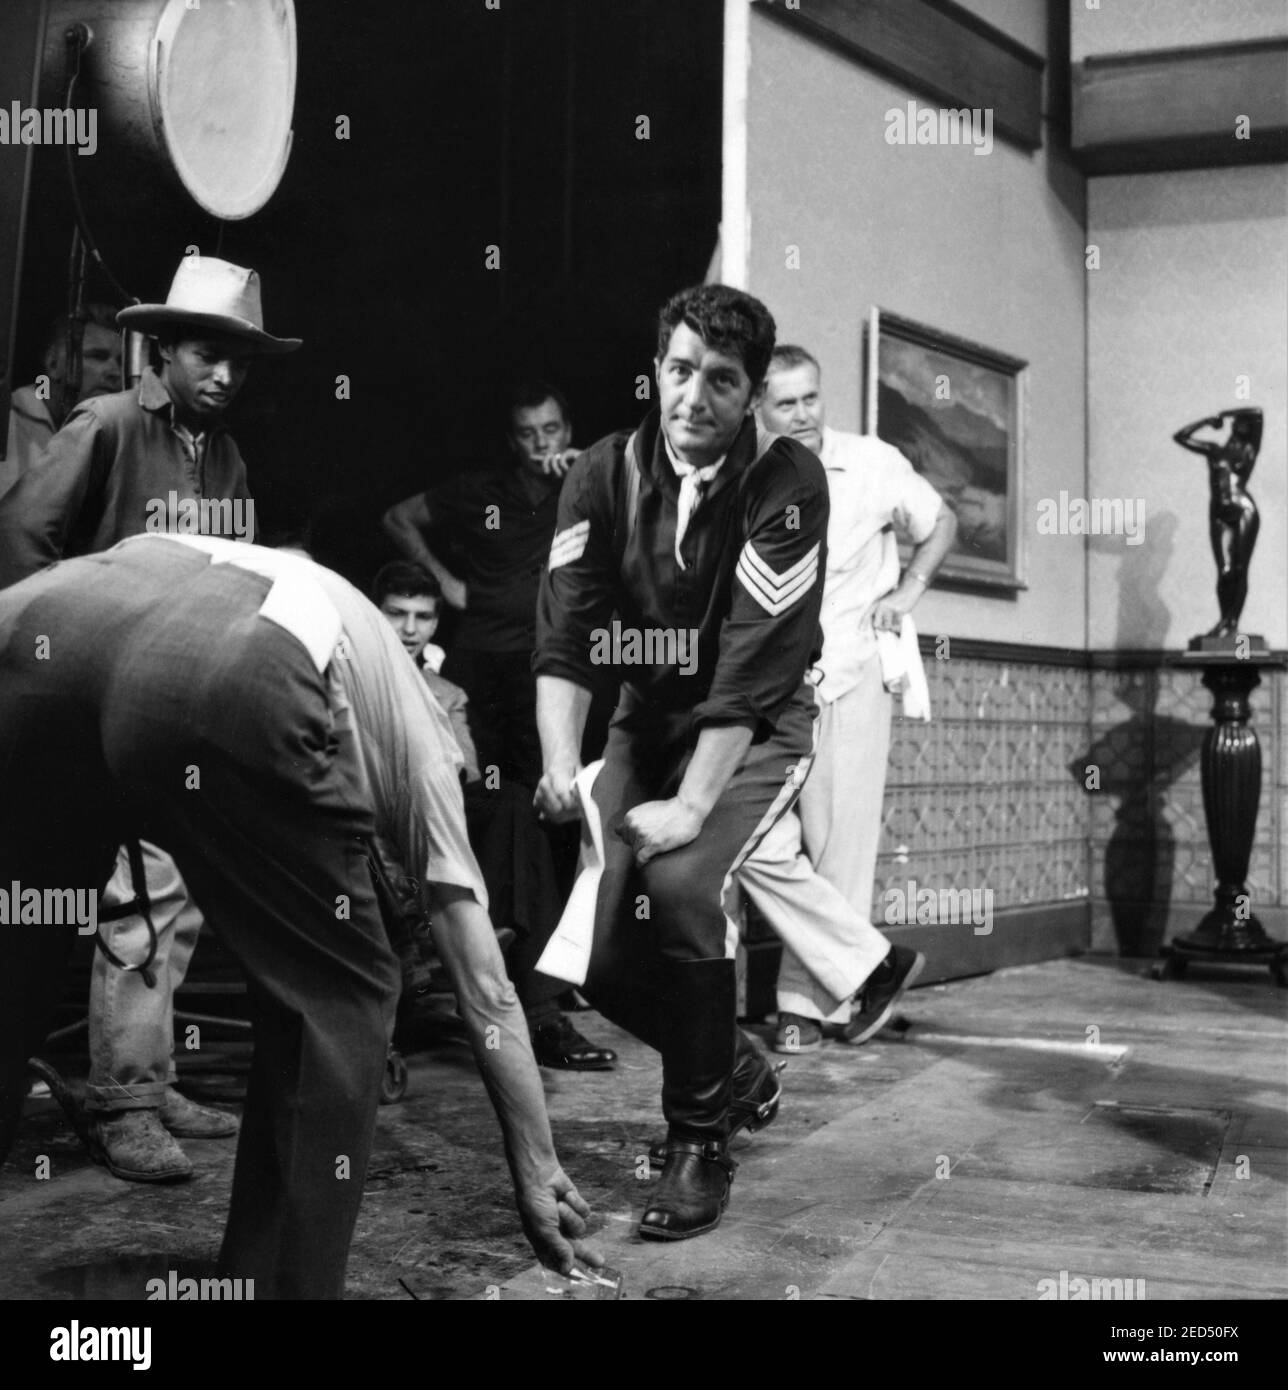 DEAN MARTIN rehearses fight scene while SAMMY DAVIS Jr's Double and FRANK SINATRA Jr (seated) look on candid on set during filming of SERGEANTS 3 / SERGEANTS THREE 1962 director JOHN STURGES Essex Productions / Meadway-Claude Productions Company / United Artists Stock Photo